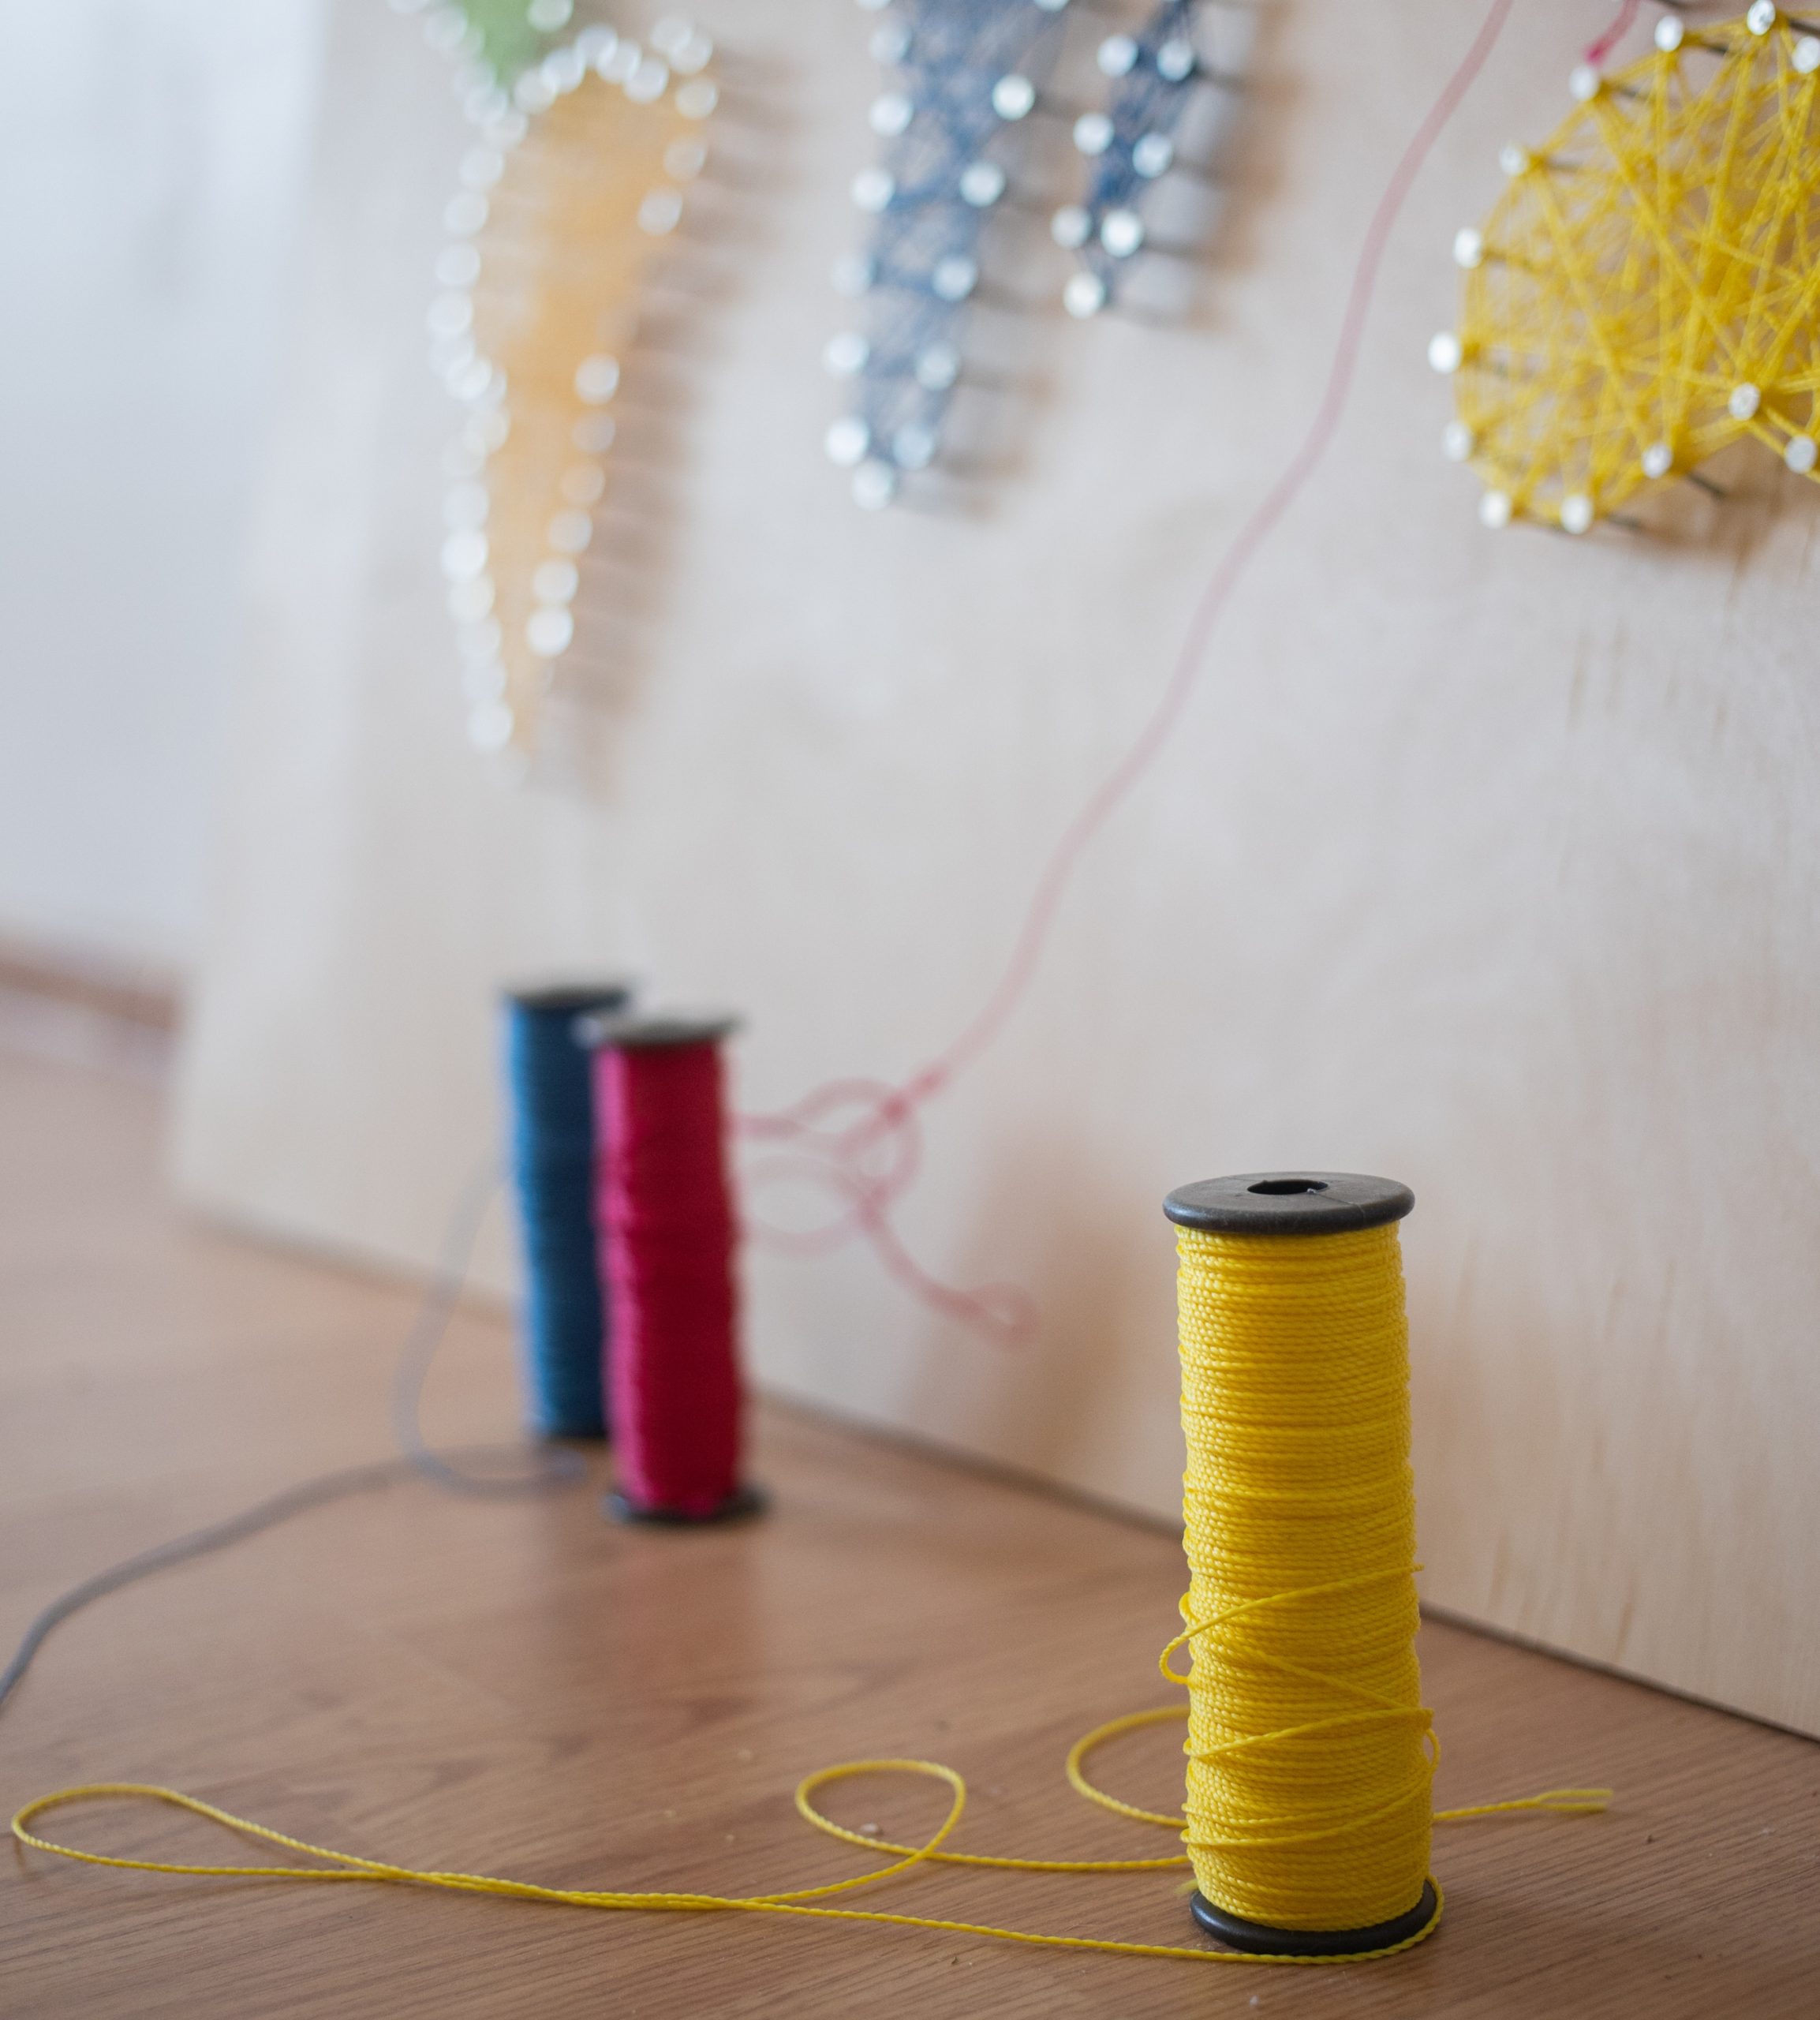 String And Star- 25+ Creative And Amazing String Art Ideas To Get Inspired  - The Creatives Hour